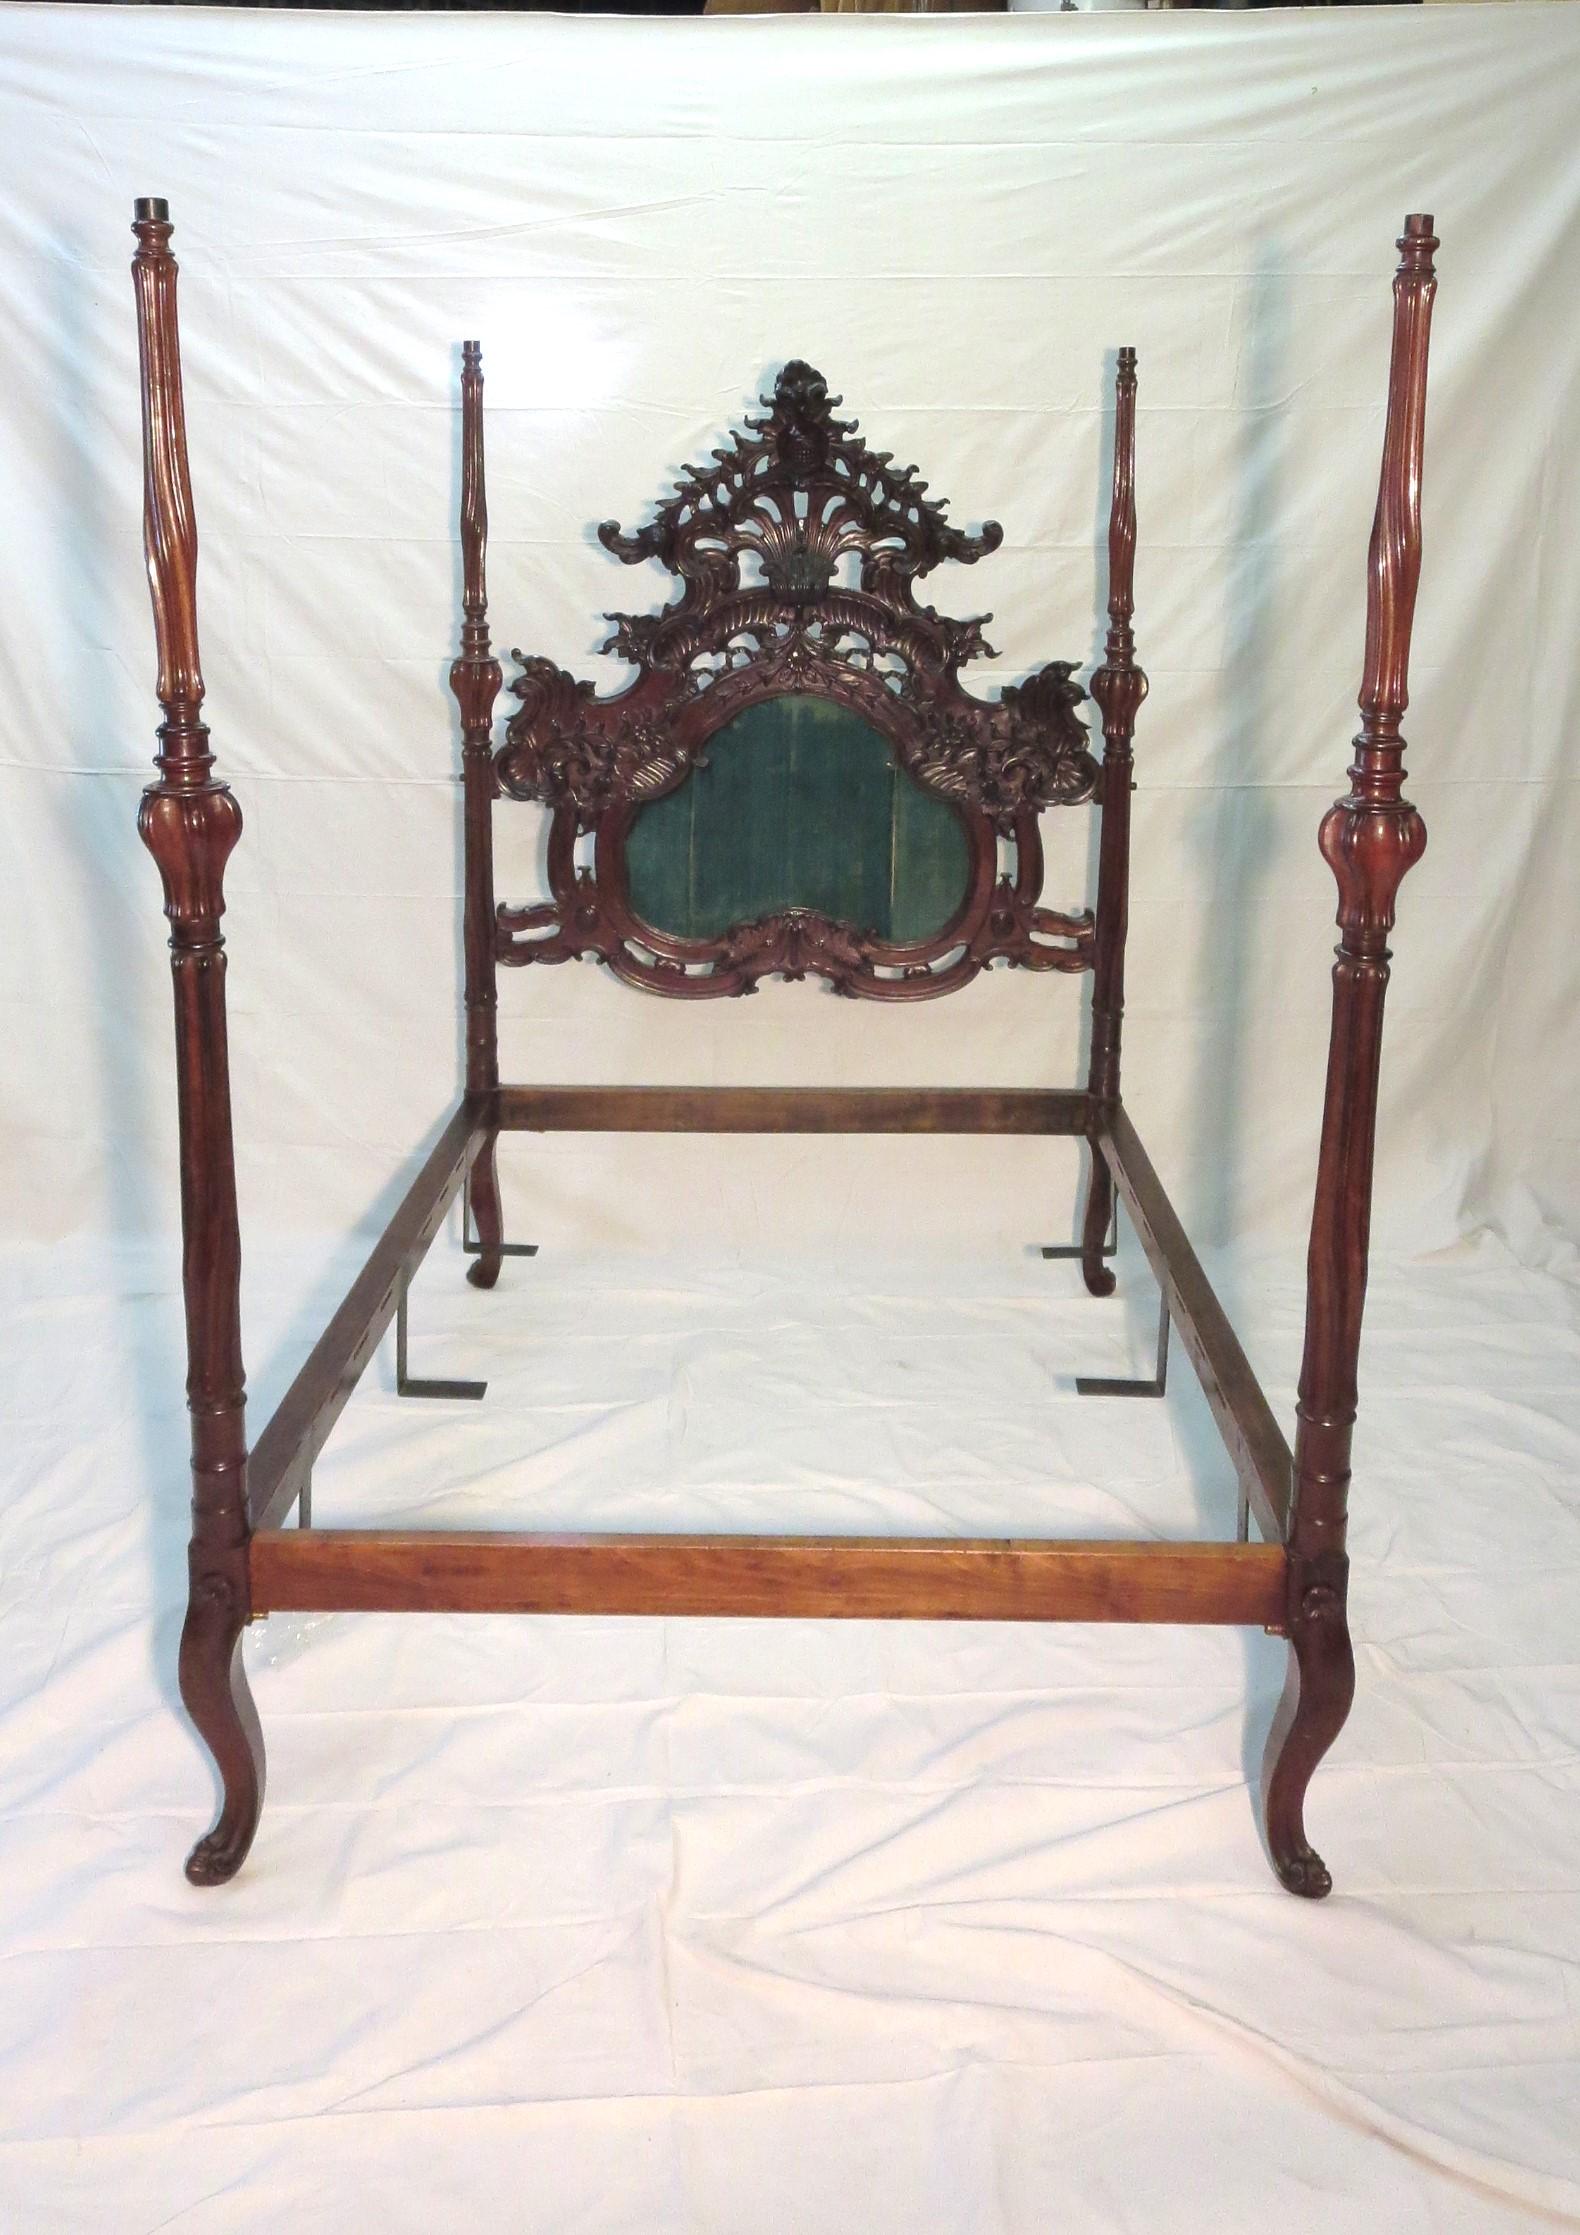 Rare Sculpted Colonial Portuguese 17th/18th C. Jacaranda Queen Bed Antique LA CA , detailed with a cartouches and Outstanding Torsade Posts  Dimensions: Height: 82”   Depth:78 ½” Width: 57”   (between full and queen ) more queen size 
fine Sculpted